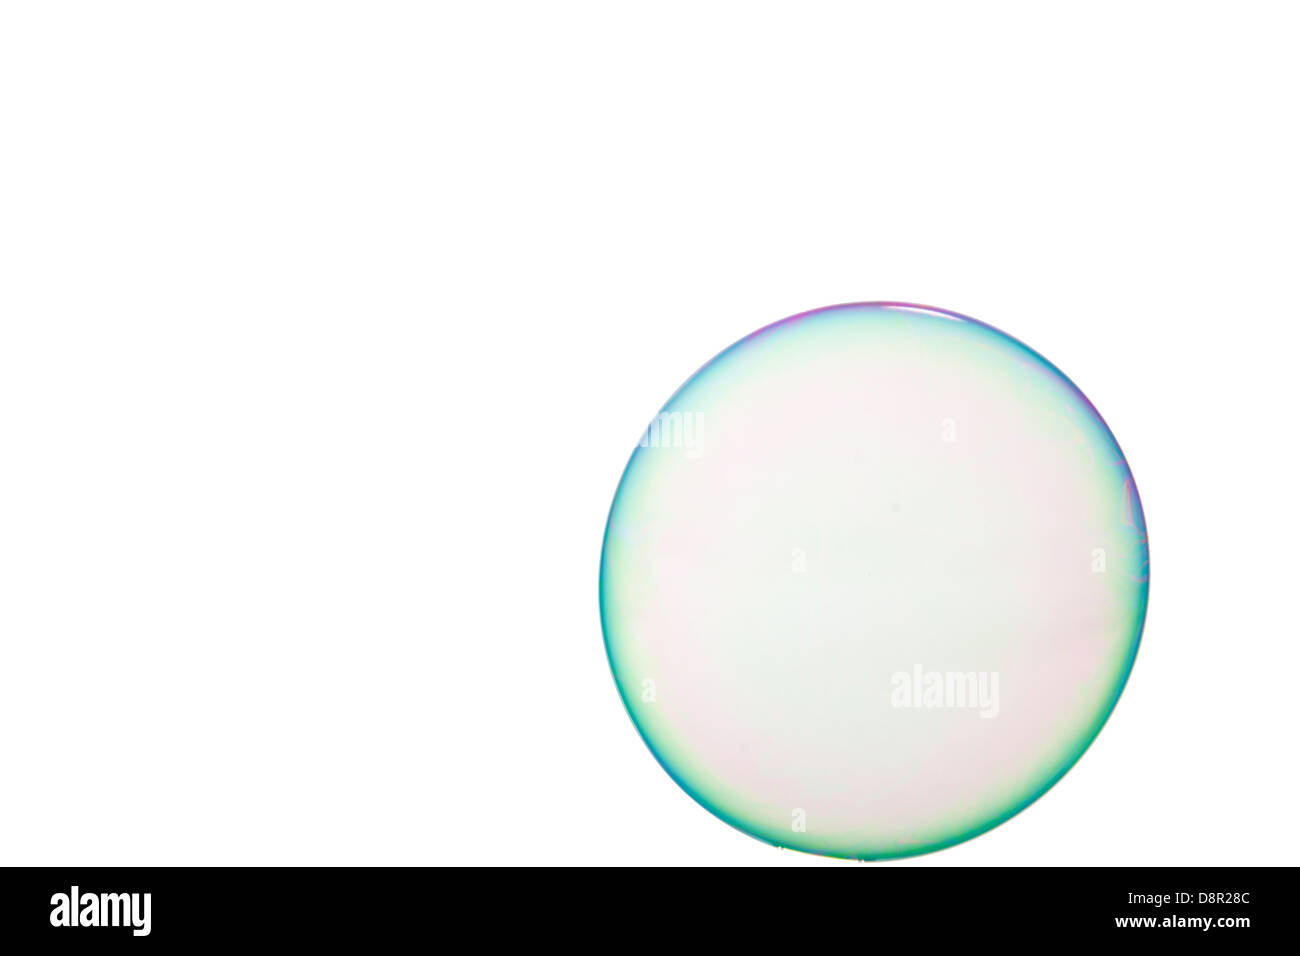 One soap bubble on a white background Stock Photo